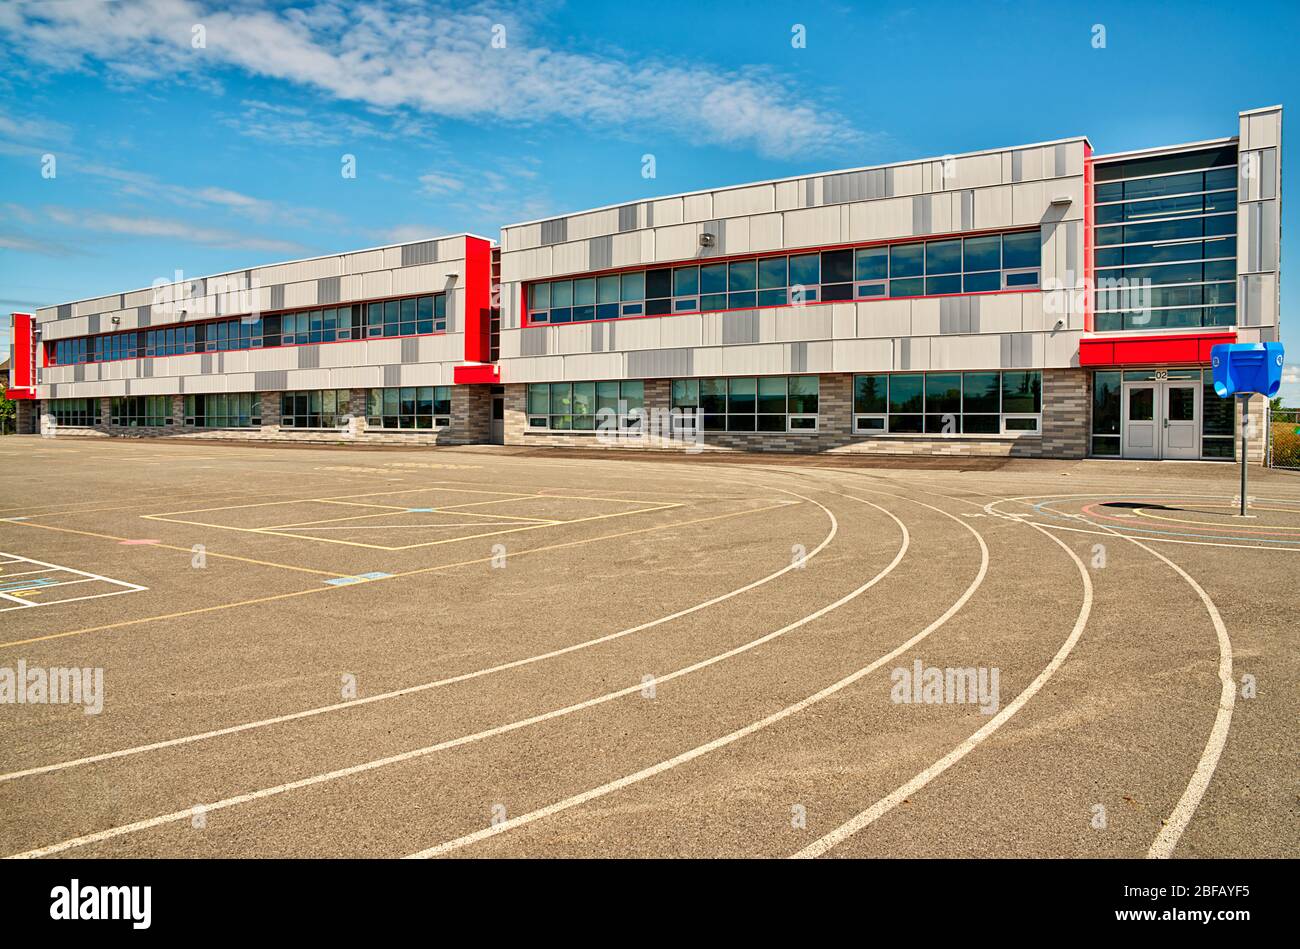 Elementary school building backside, a sunny spring day. Stock Photo